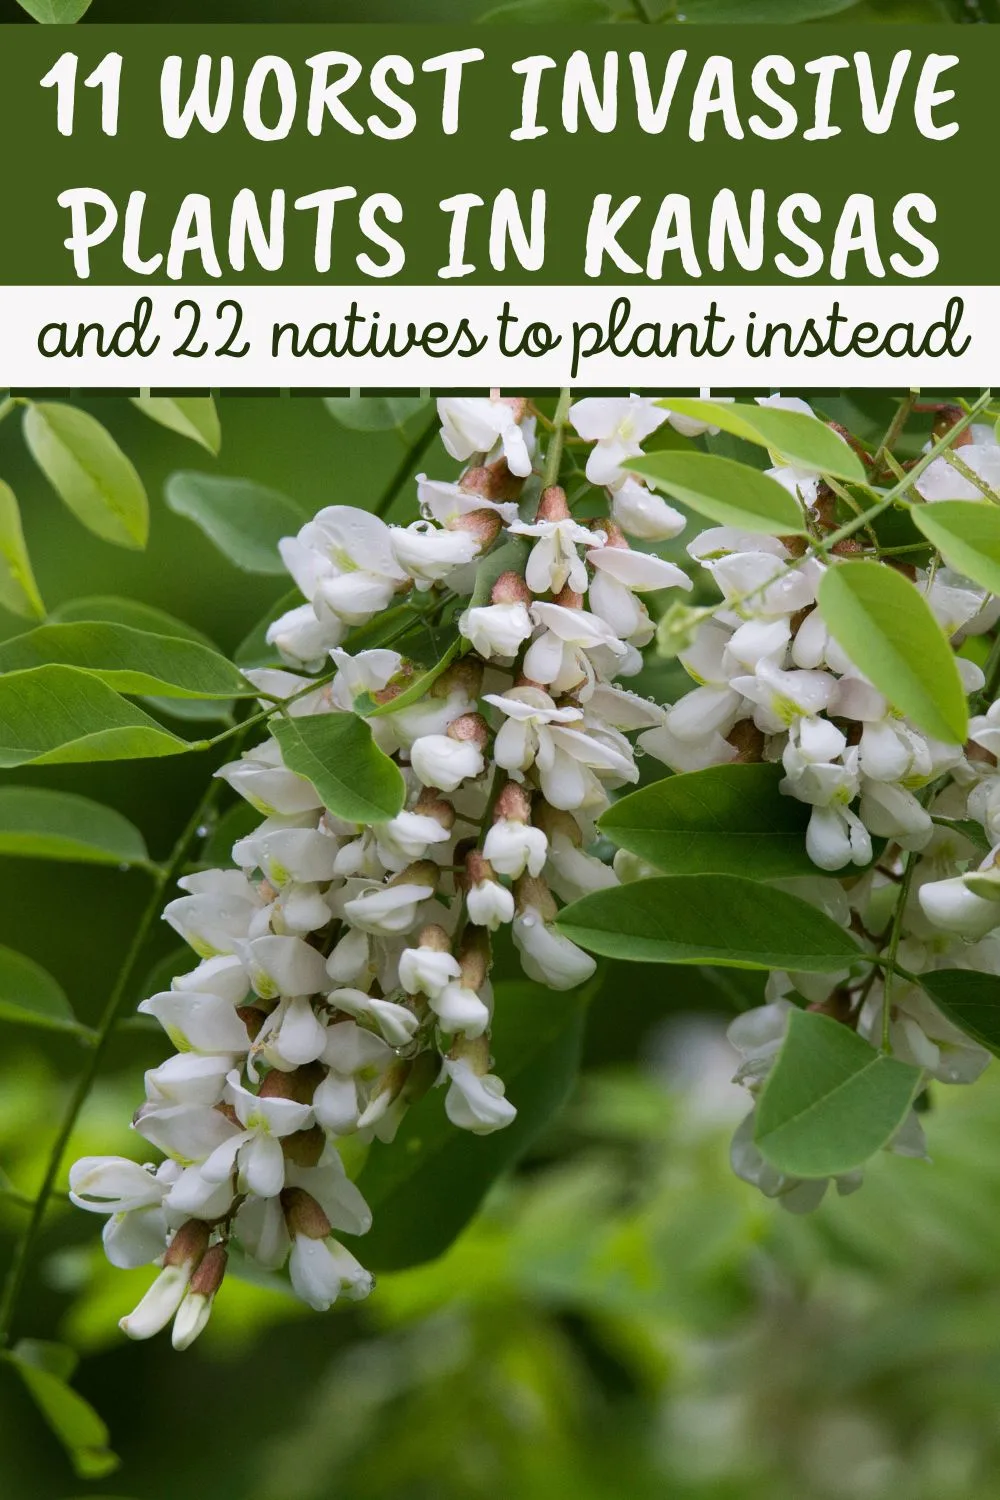 11 worst invasive plants in Kansas and 22 natives to plant instead.